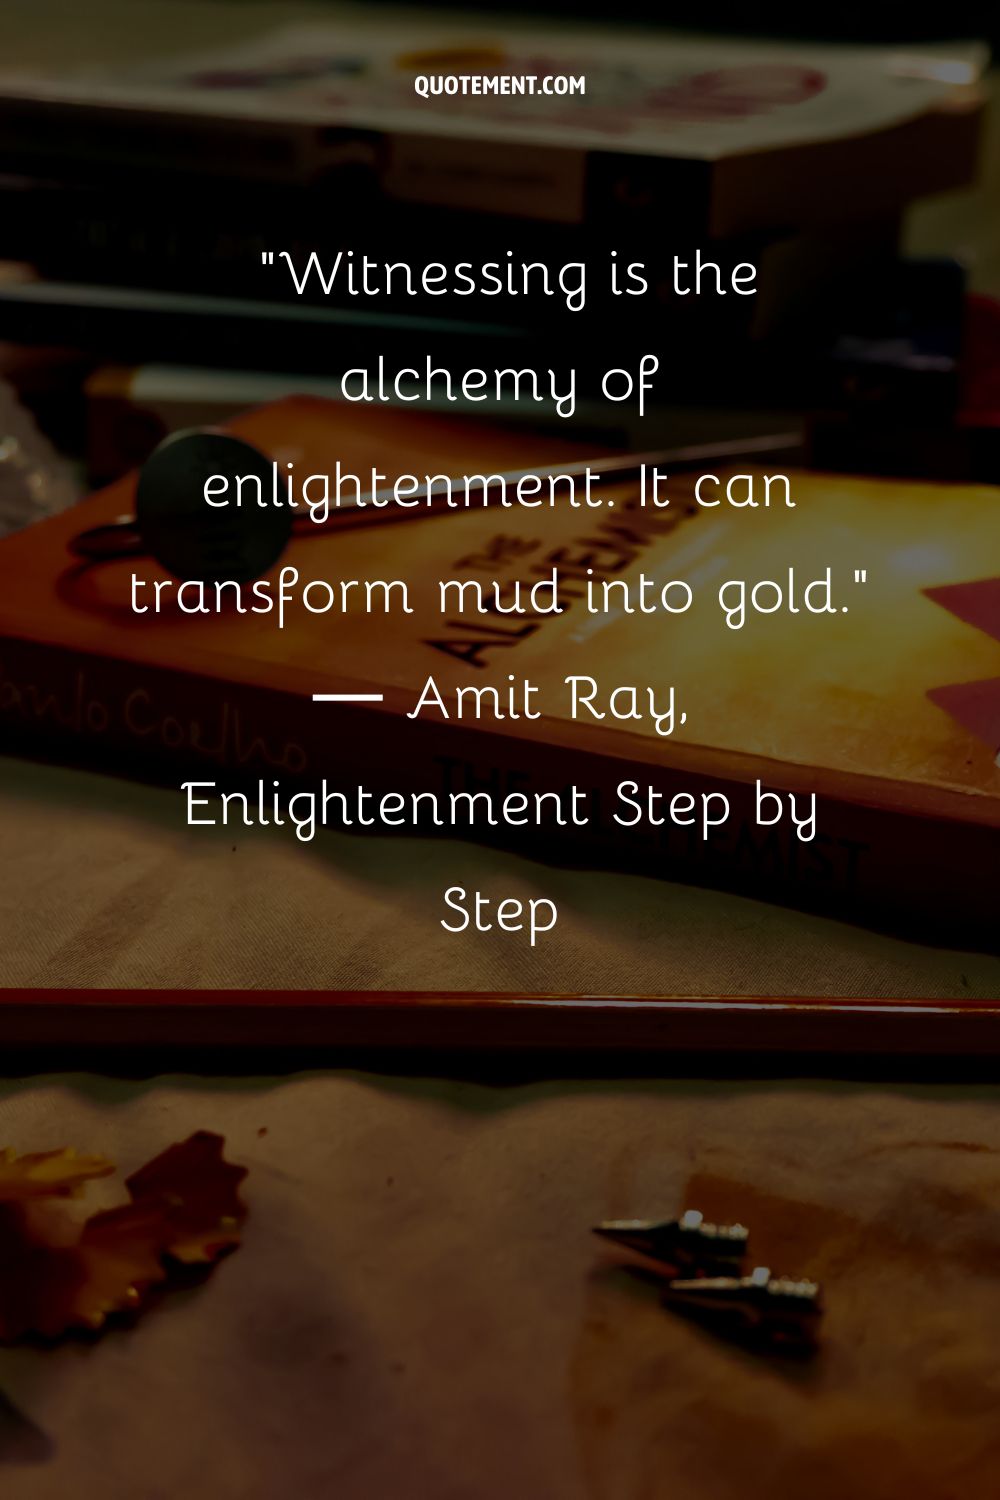 Witnessing is the alchemy of enlightenment. It can transform mud into gold